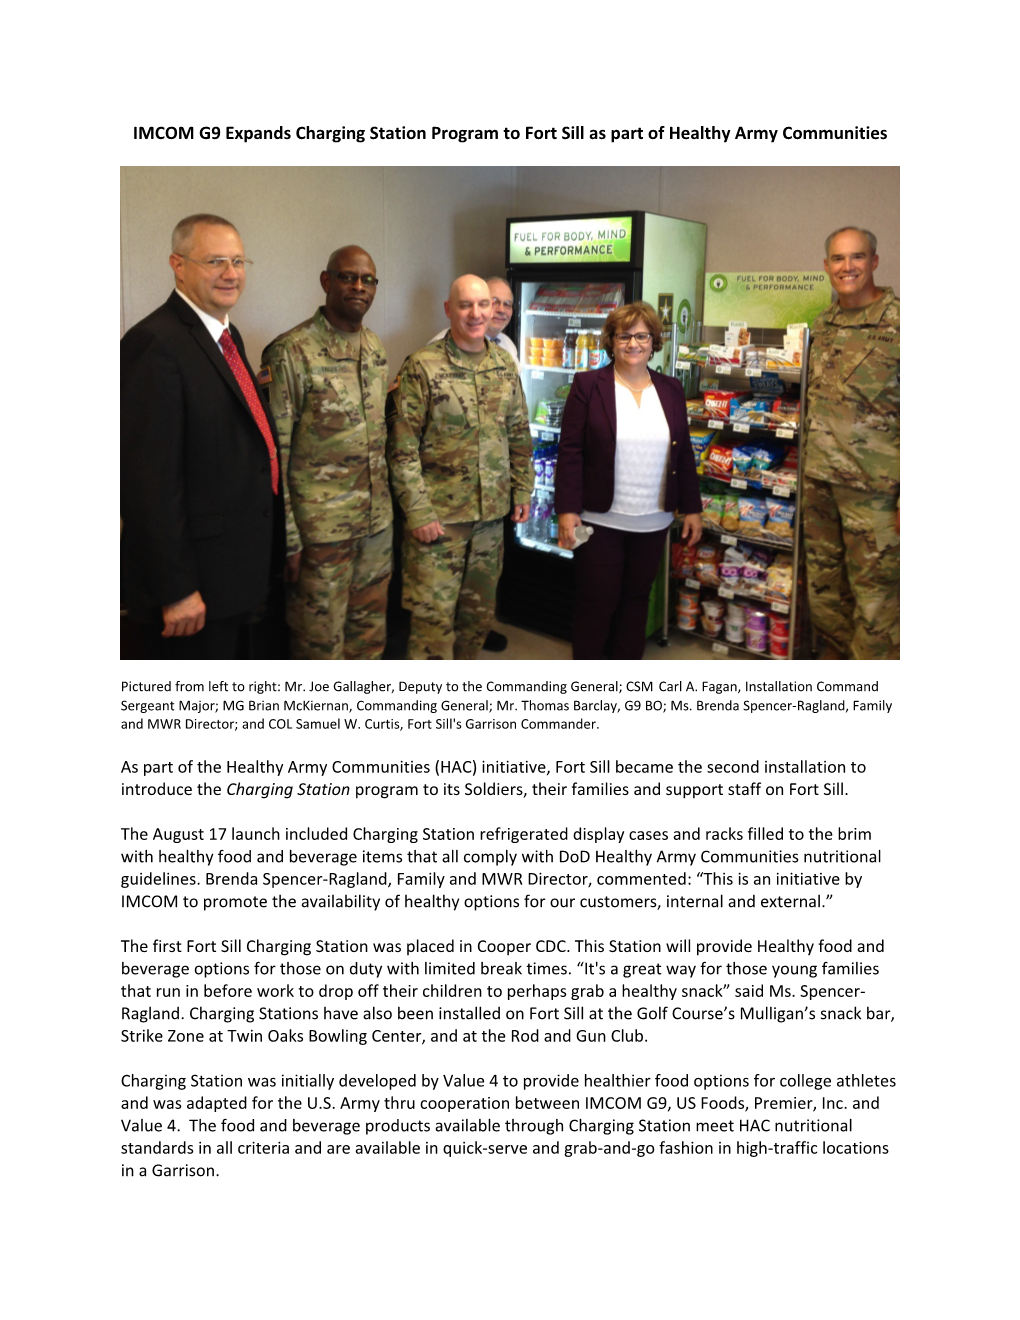 IMCOM G9 Expands Charging Station Program to Fort Sill As Part of Healthy Army Communities